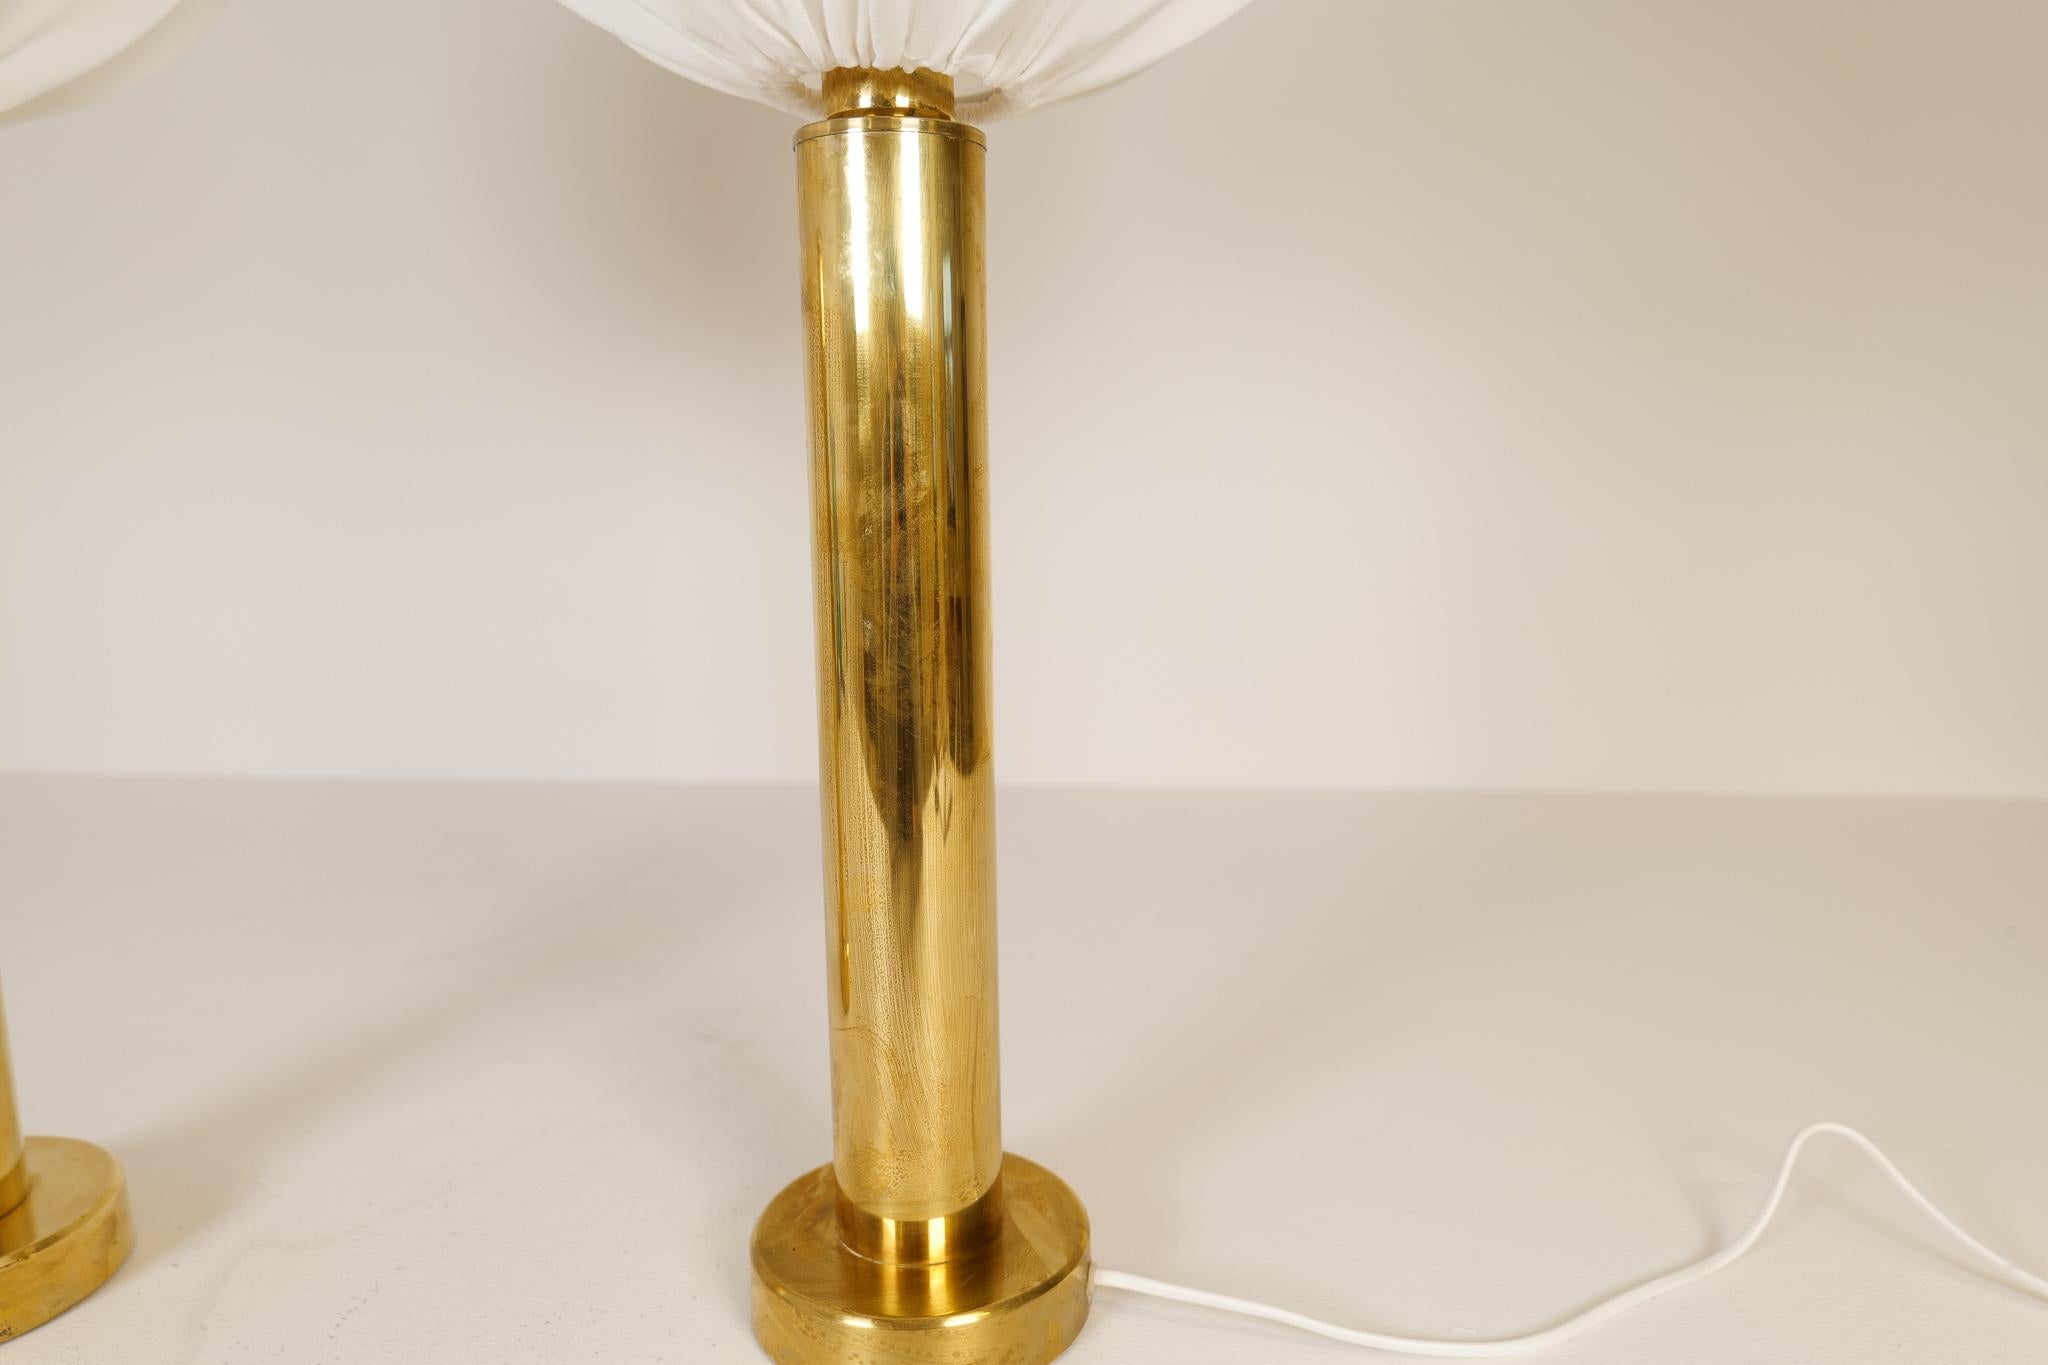 Midcentury Pair of Brass Table Lamps by Kosta Elarmatur, Sweden, 1960s For Sale 1